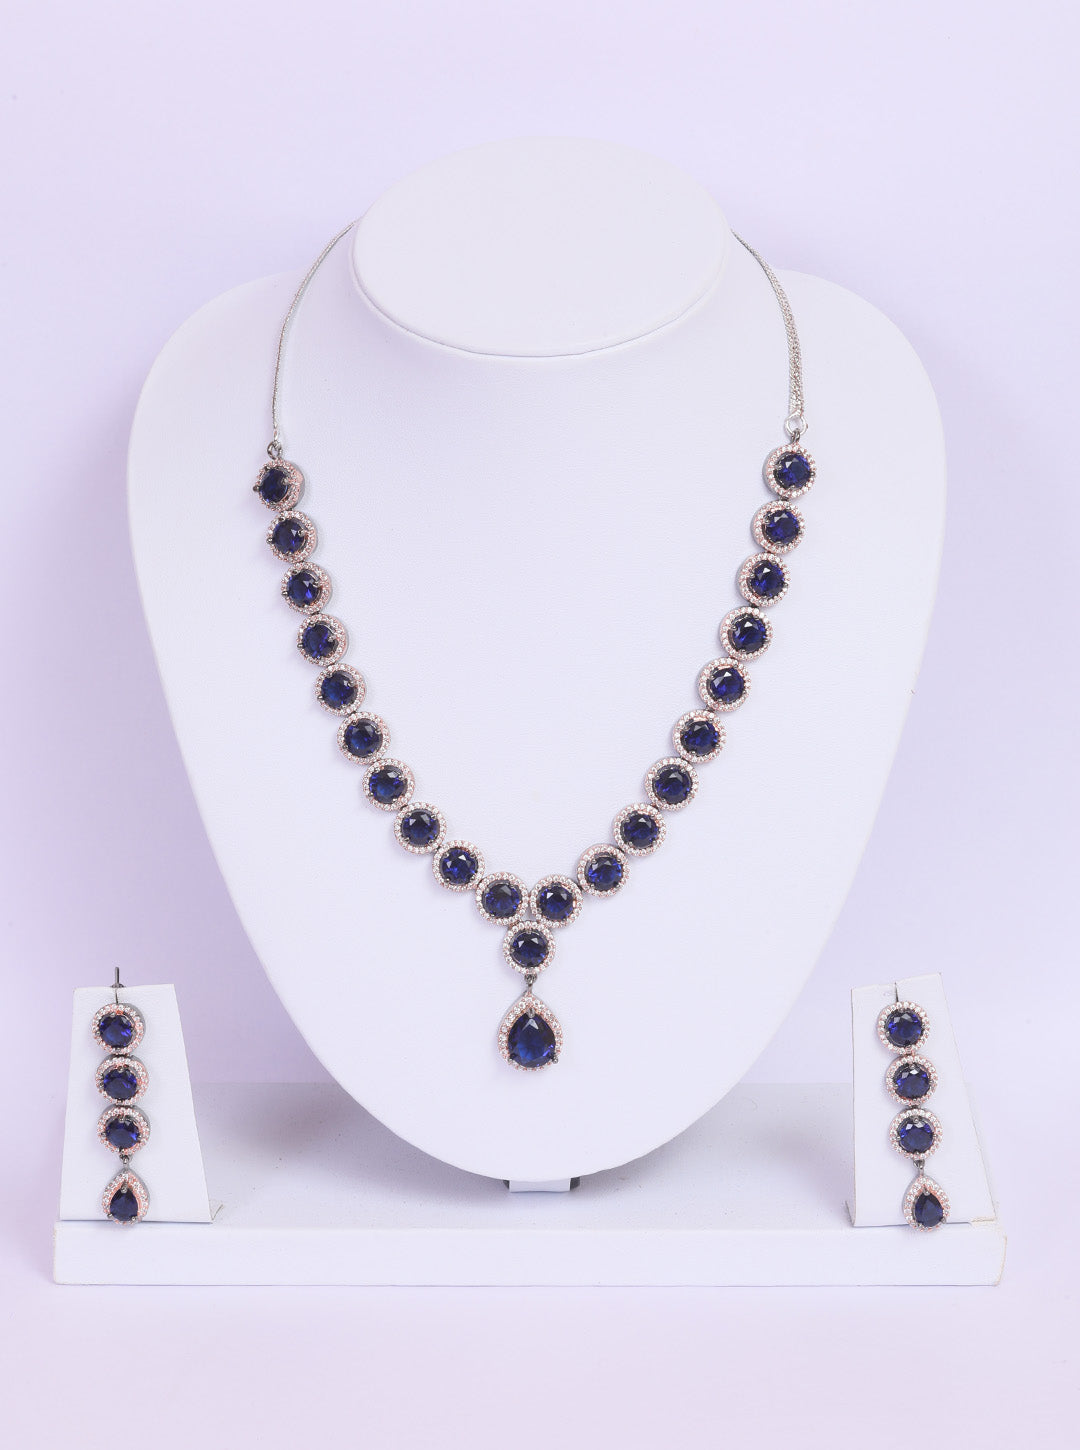 Premium Dual Tone of Black and Rose, studded with sparkling Blue and White CZ stones designer Necklace Set 8937N